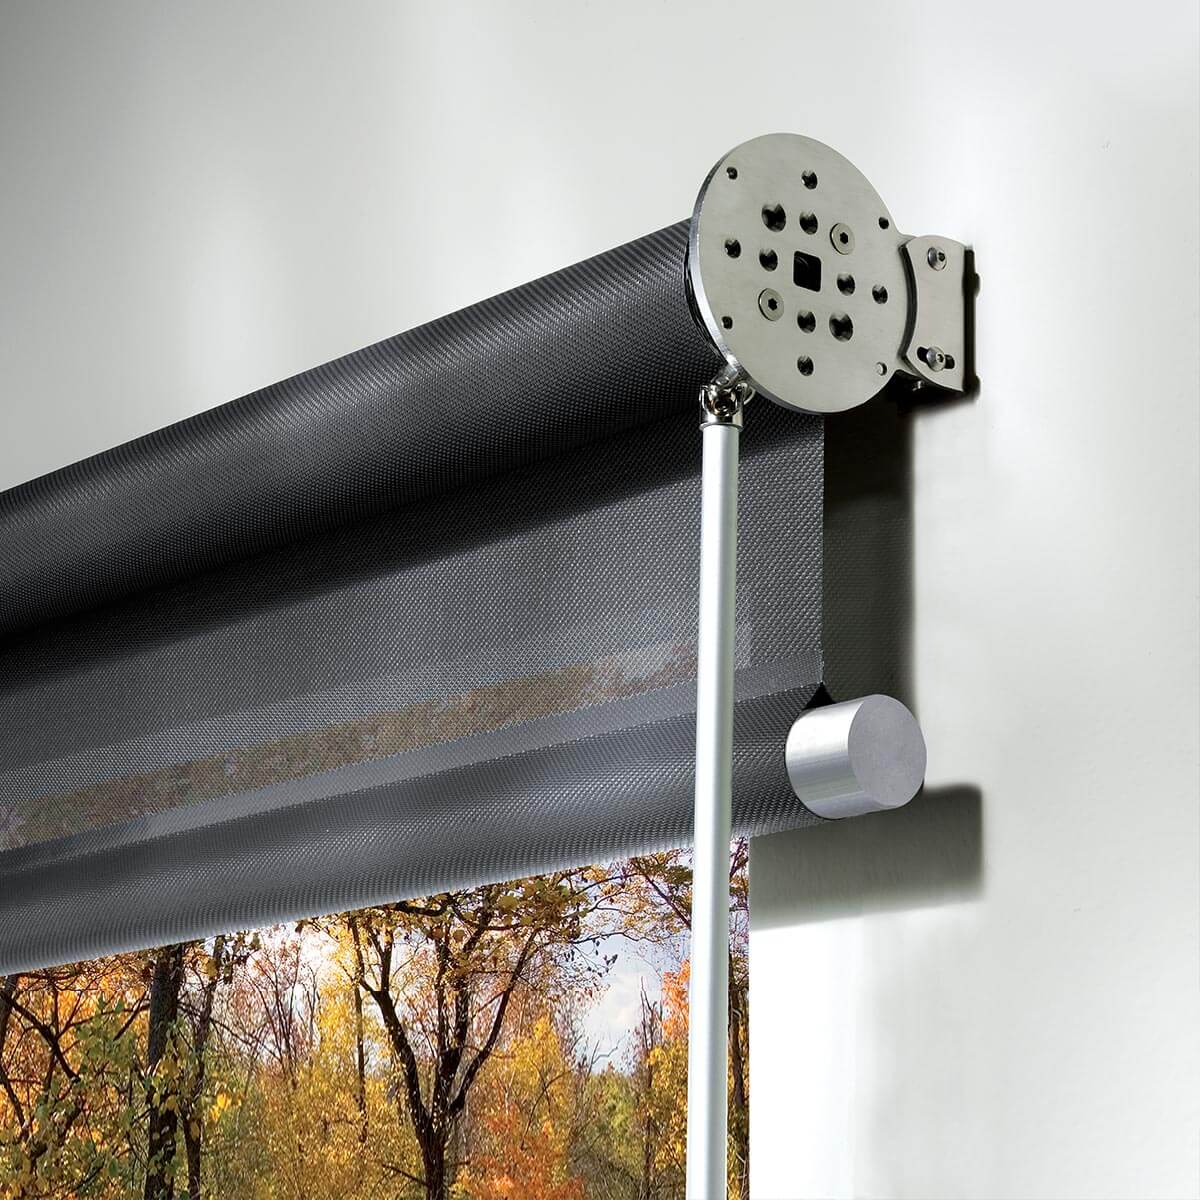 Winch-operated roller blind, Extra large , Free hanging. Pronema